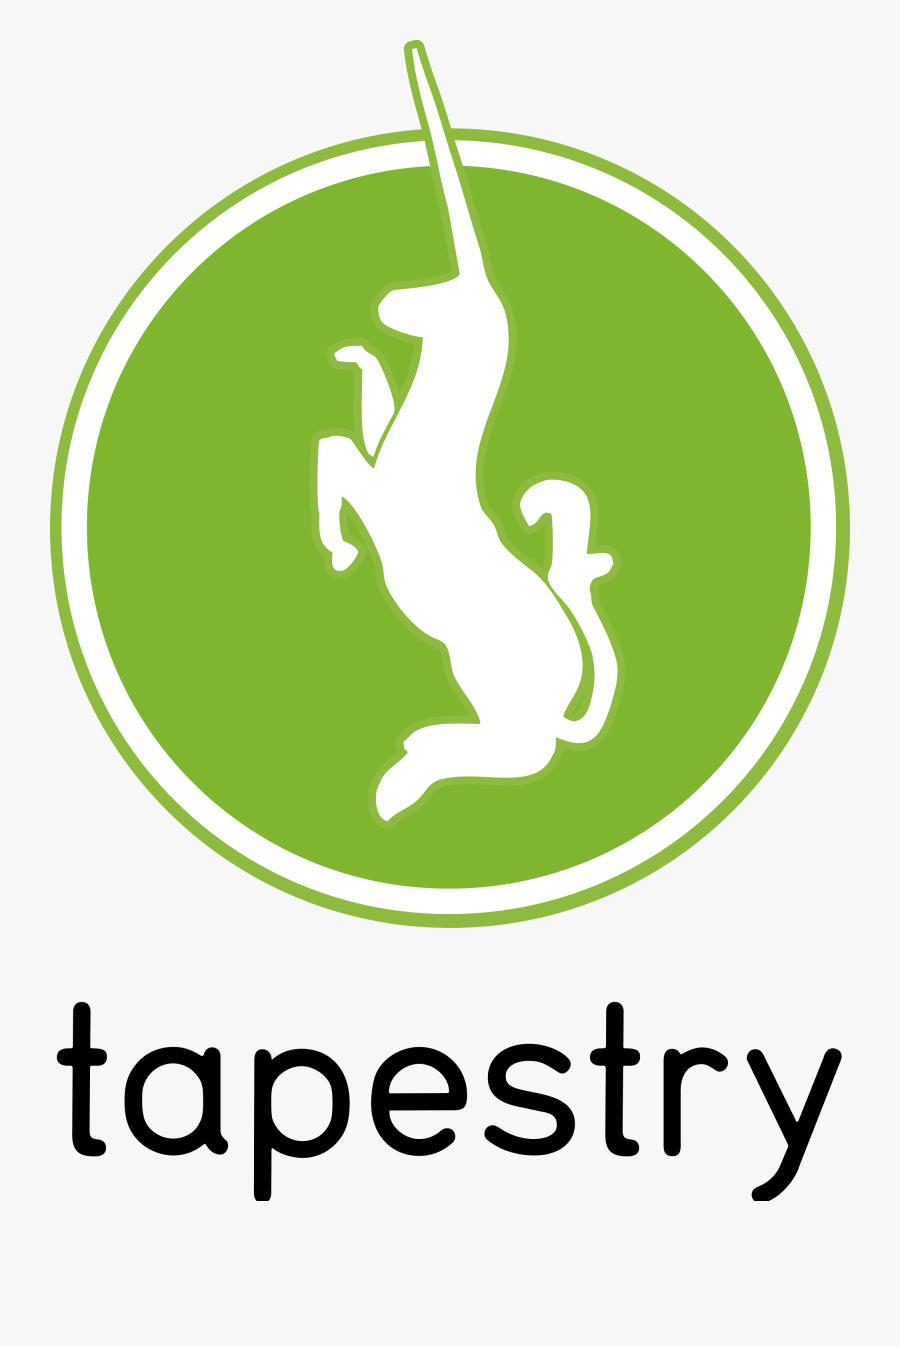 Apache Tapestry Clipart , Png Download - Apache Tapestry Logo, Transparent Clipart